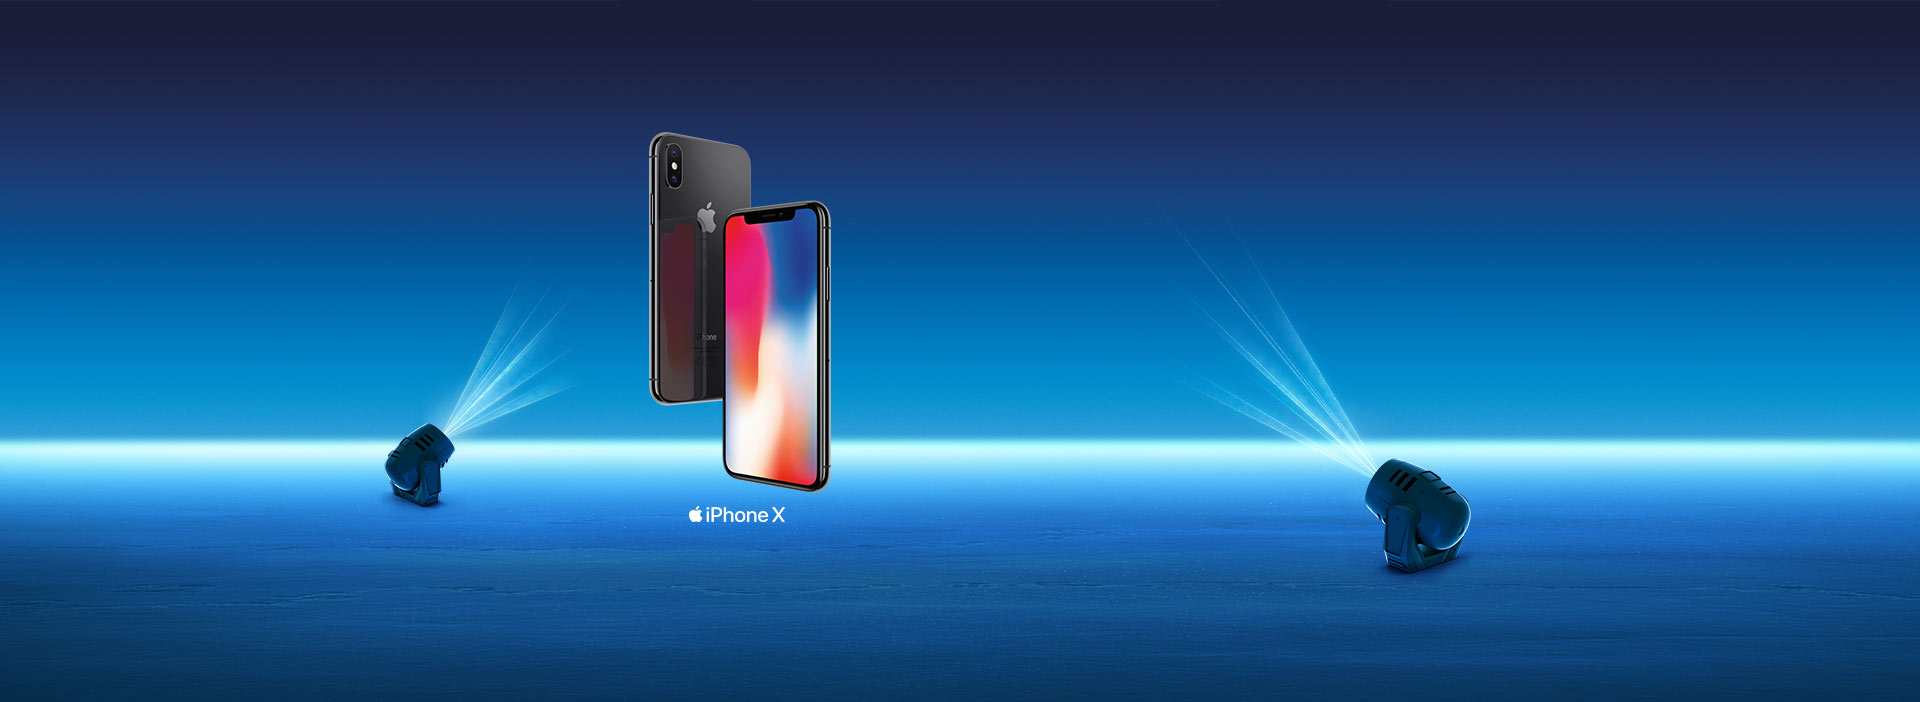 Apple will produce iPhone flagships from 2019 also in India